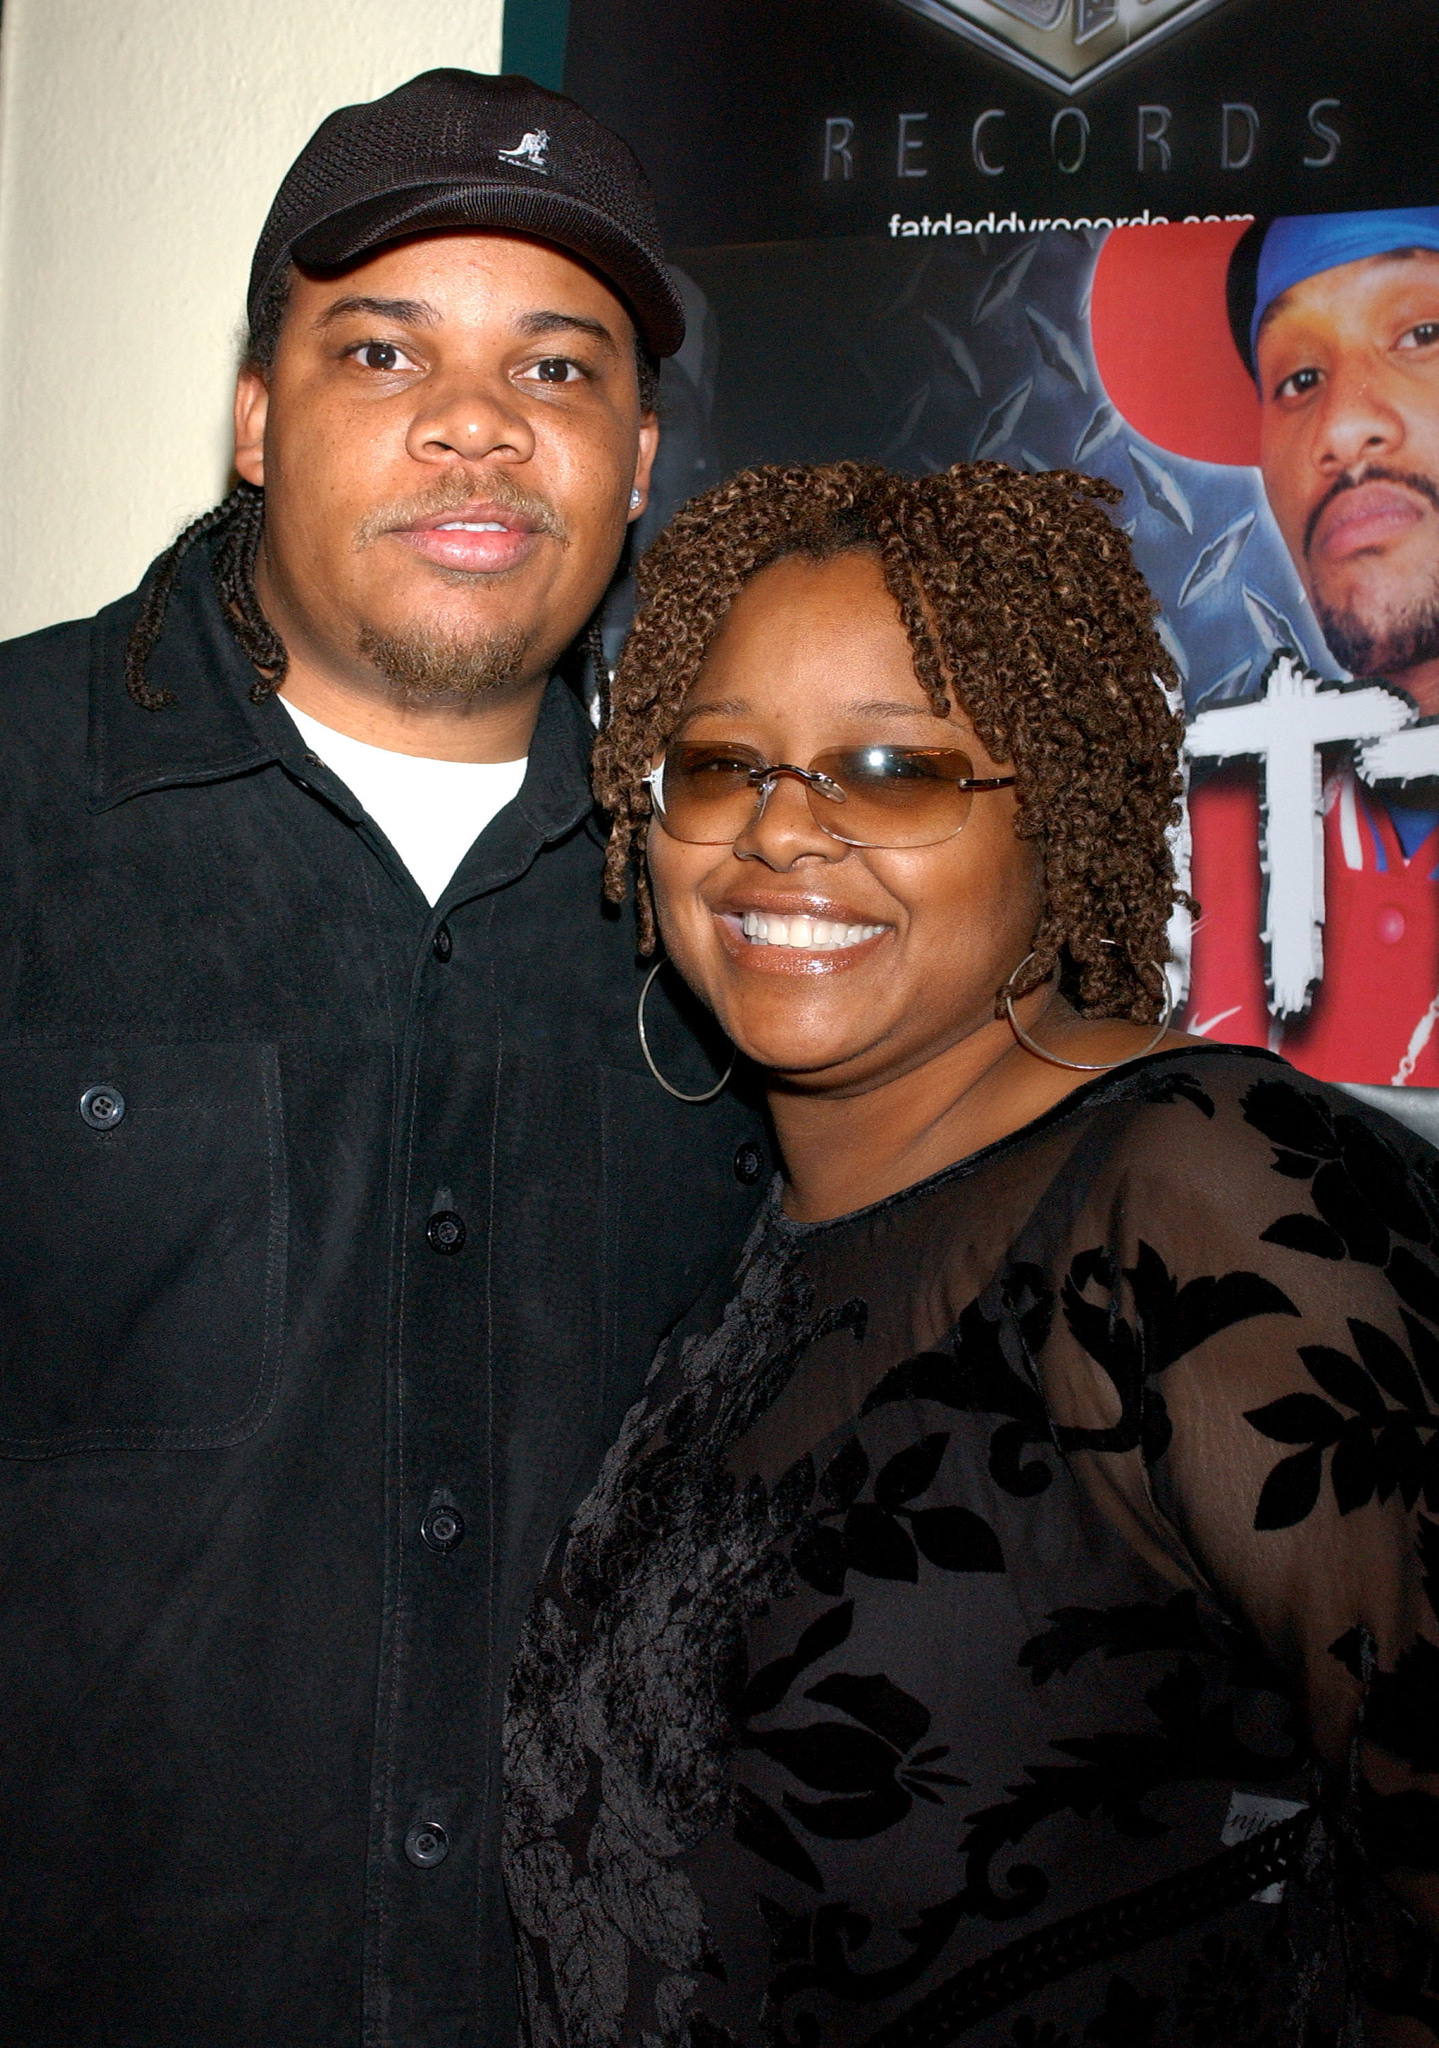 Yvette Wilson and Fat Daddy